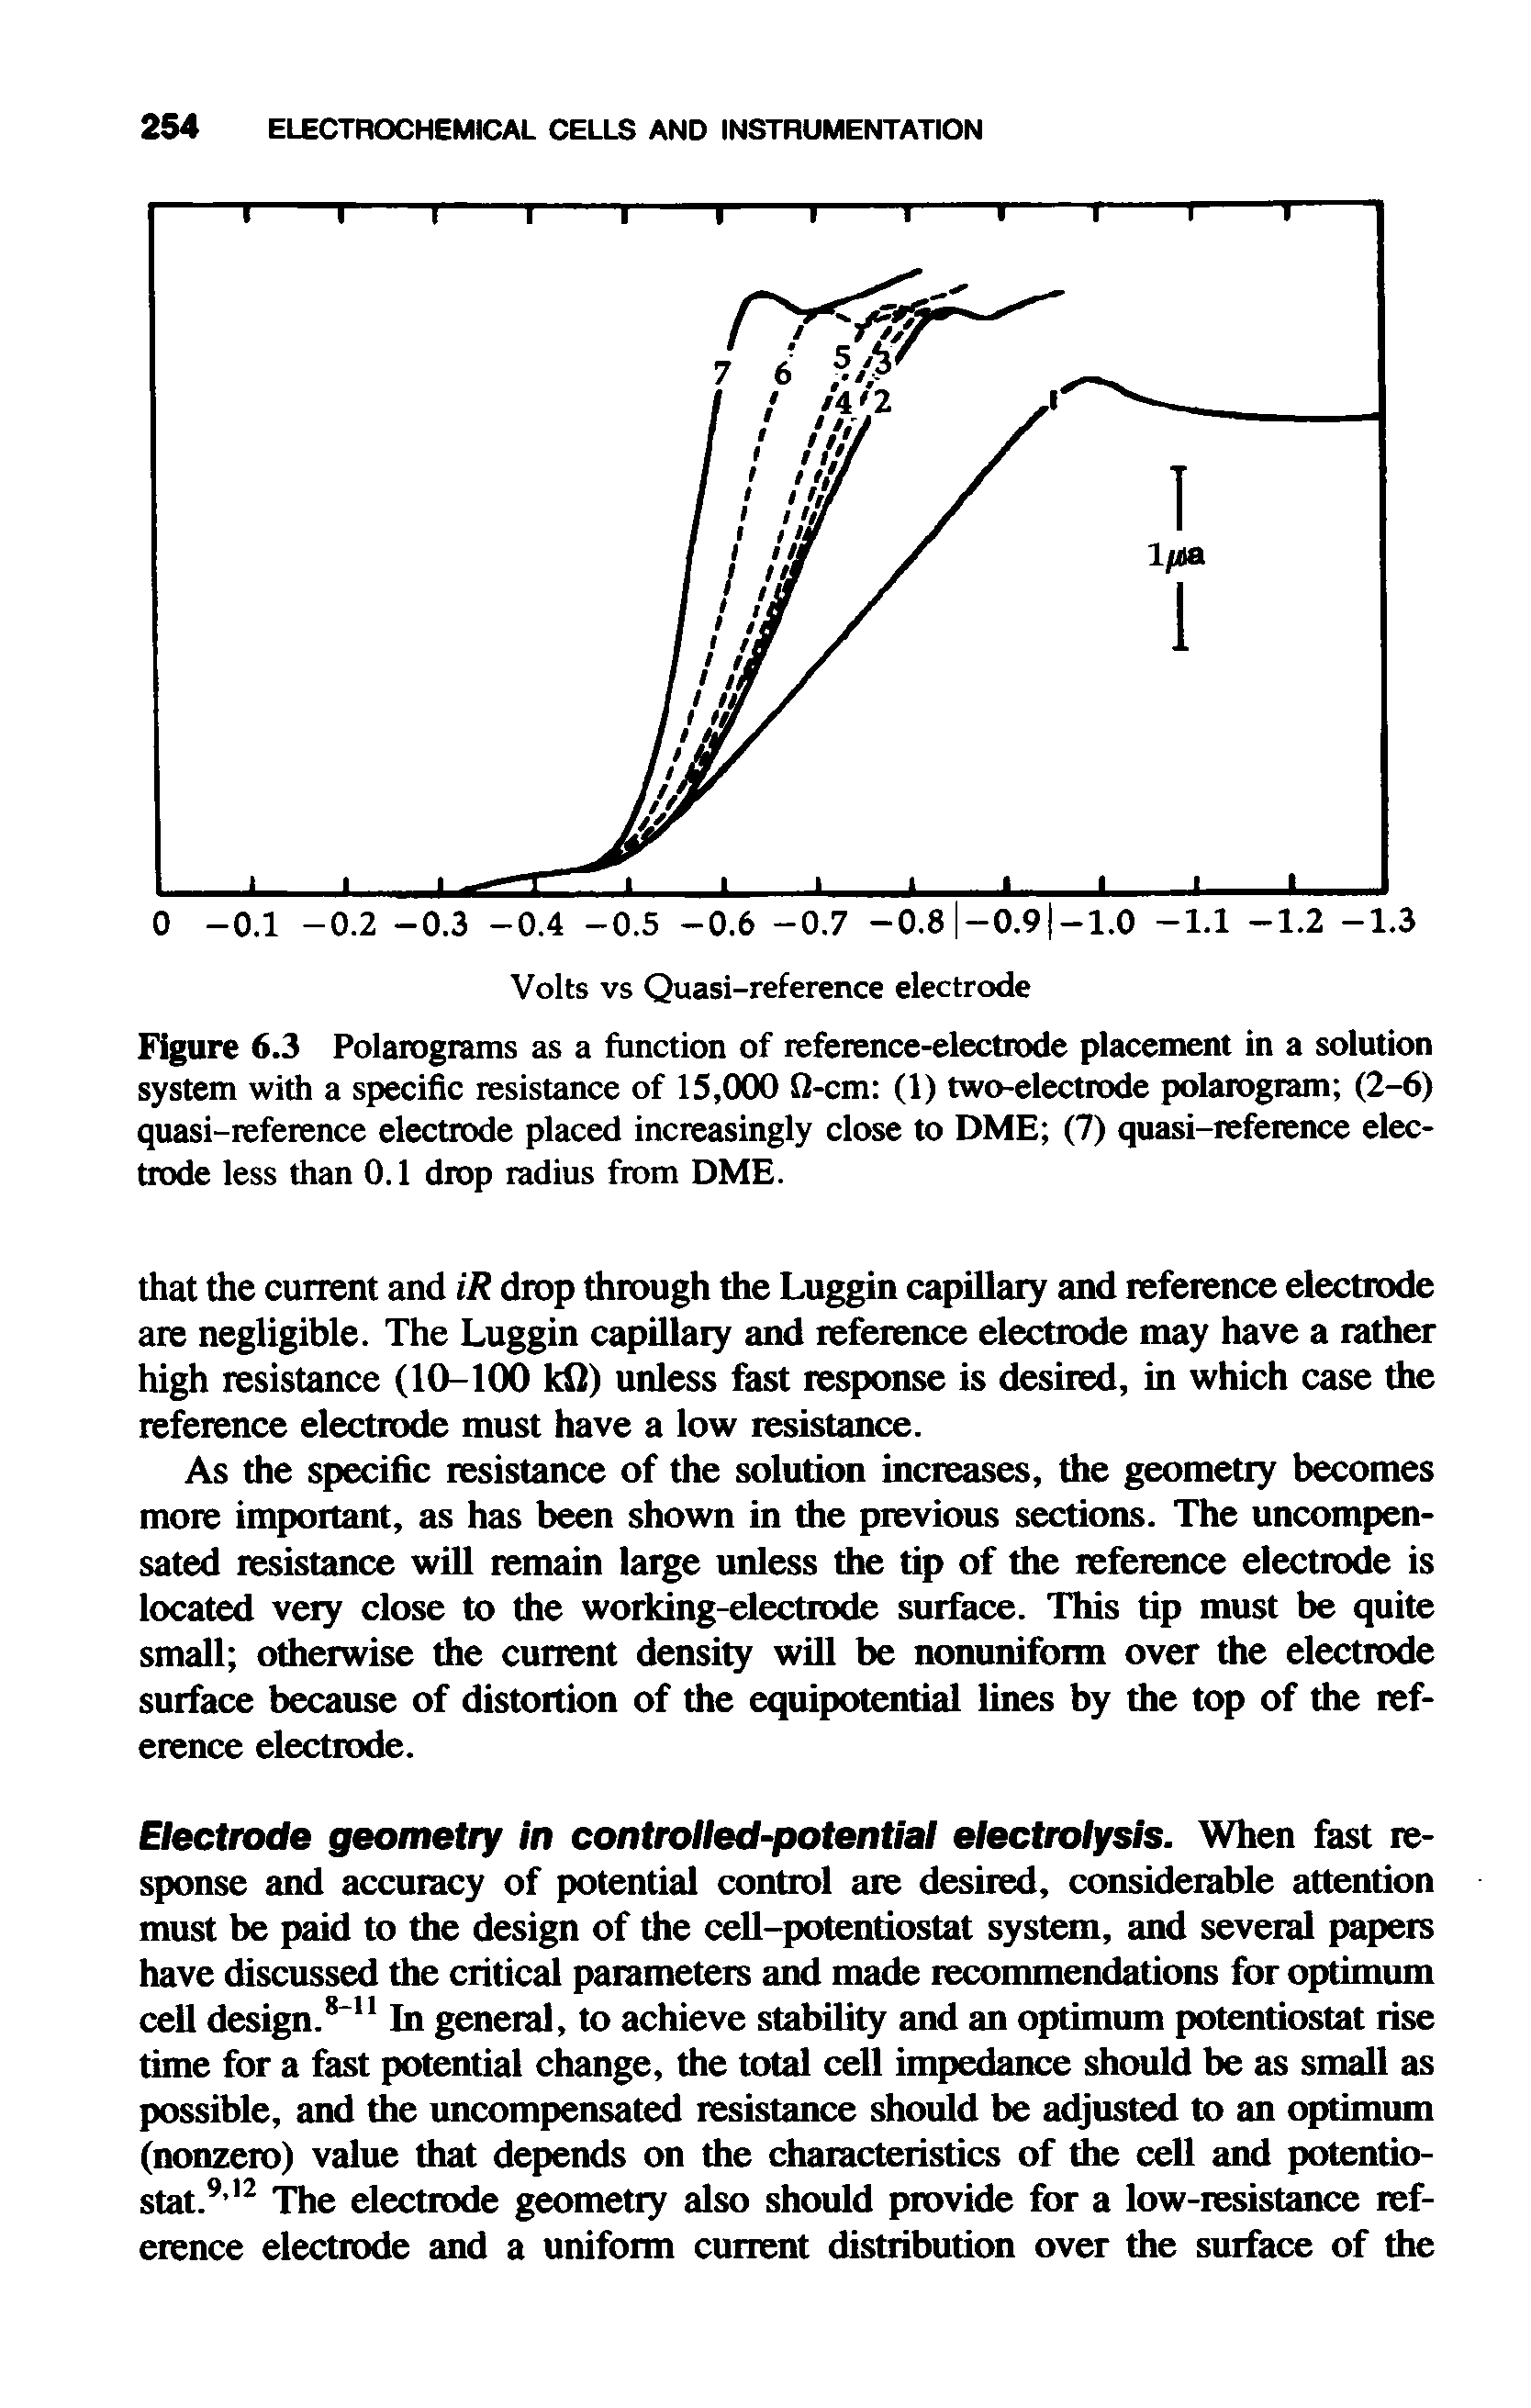 Figure 6.3 Polarograms as a function of reference-electrode placement in a solution system with a specific resistance of 15,000 12-cm (1) two-electrode polarogram (2-6) quasi-reference electrode placed increasingly close to DME (7) quasi-reference electrode less than 0.1 drop radius from DME.